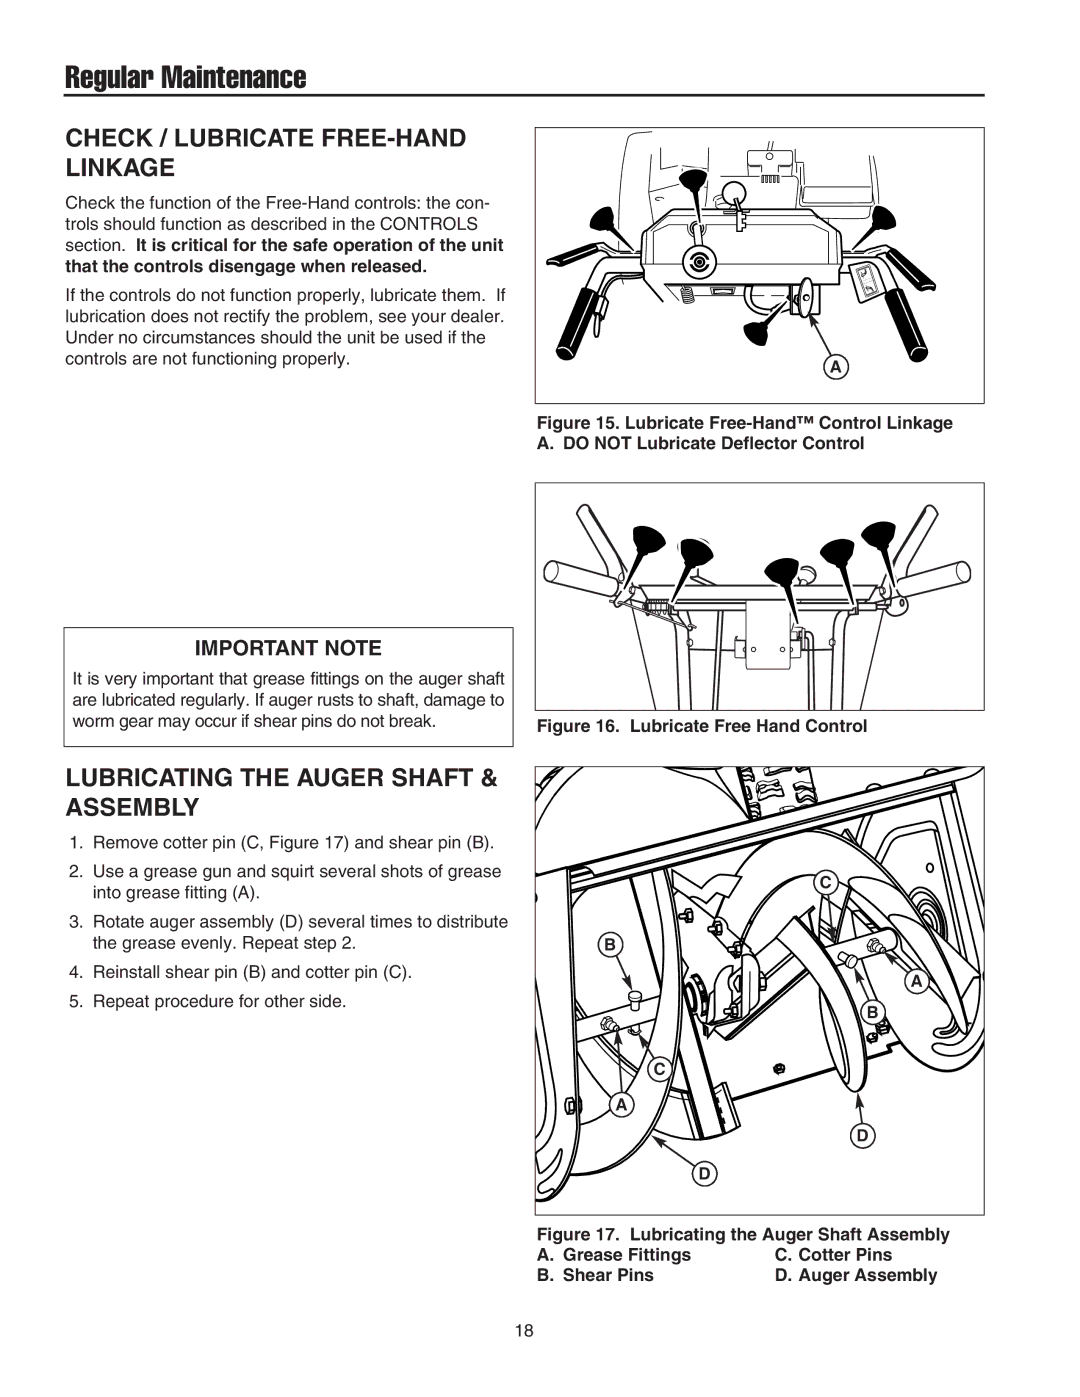 Snapper manual Check / Lubricate FREE-HAND Linkage, Lubricating the Auger Shaft & Assembly 